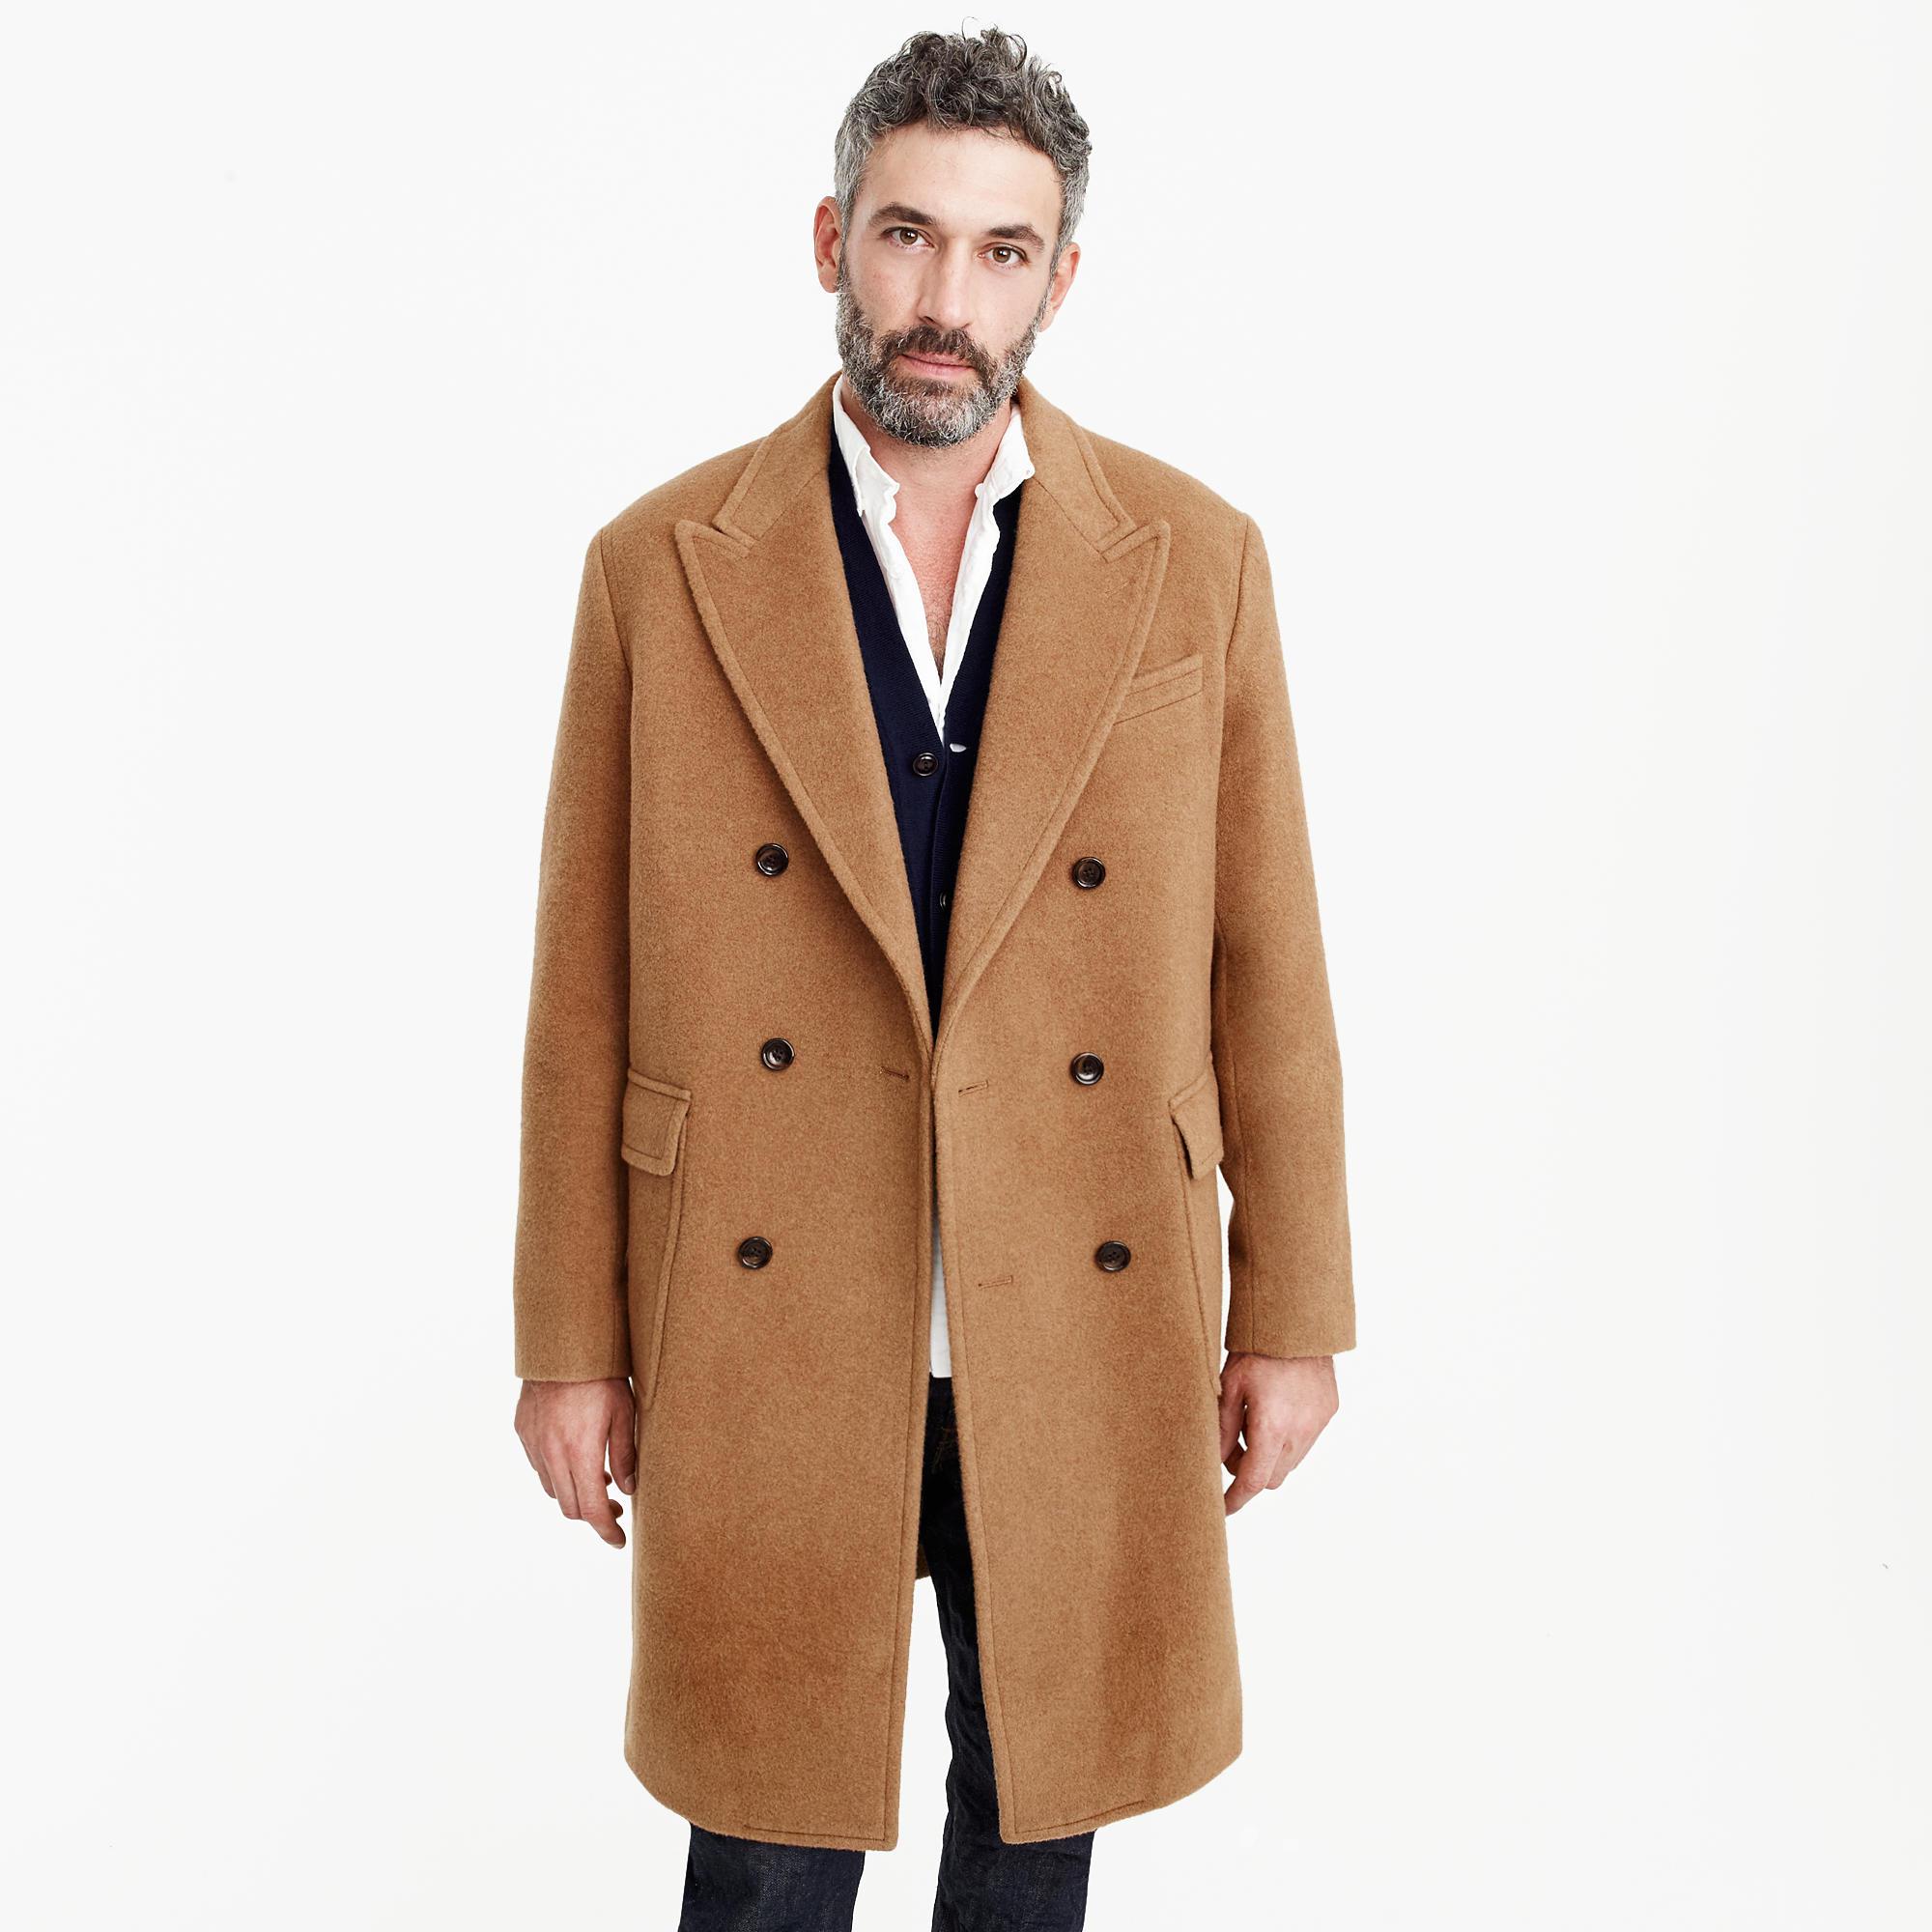 BOSS - Long-length double-breasted coat in camel hair